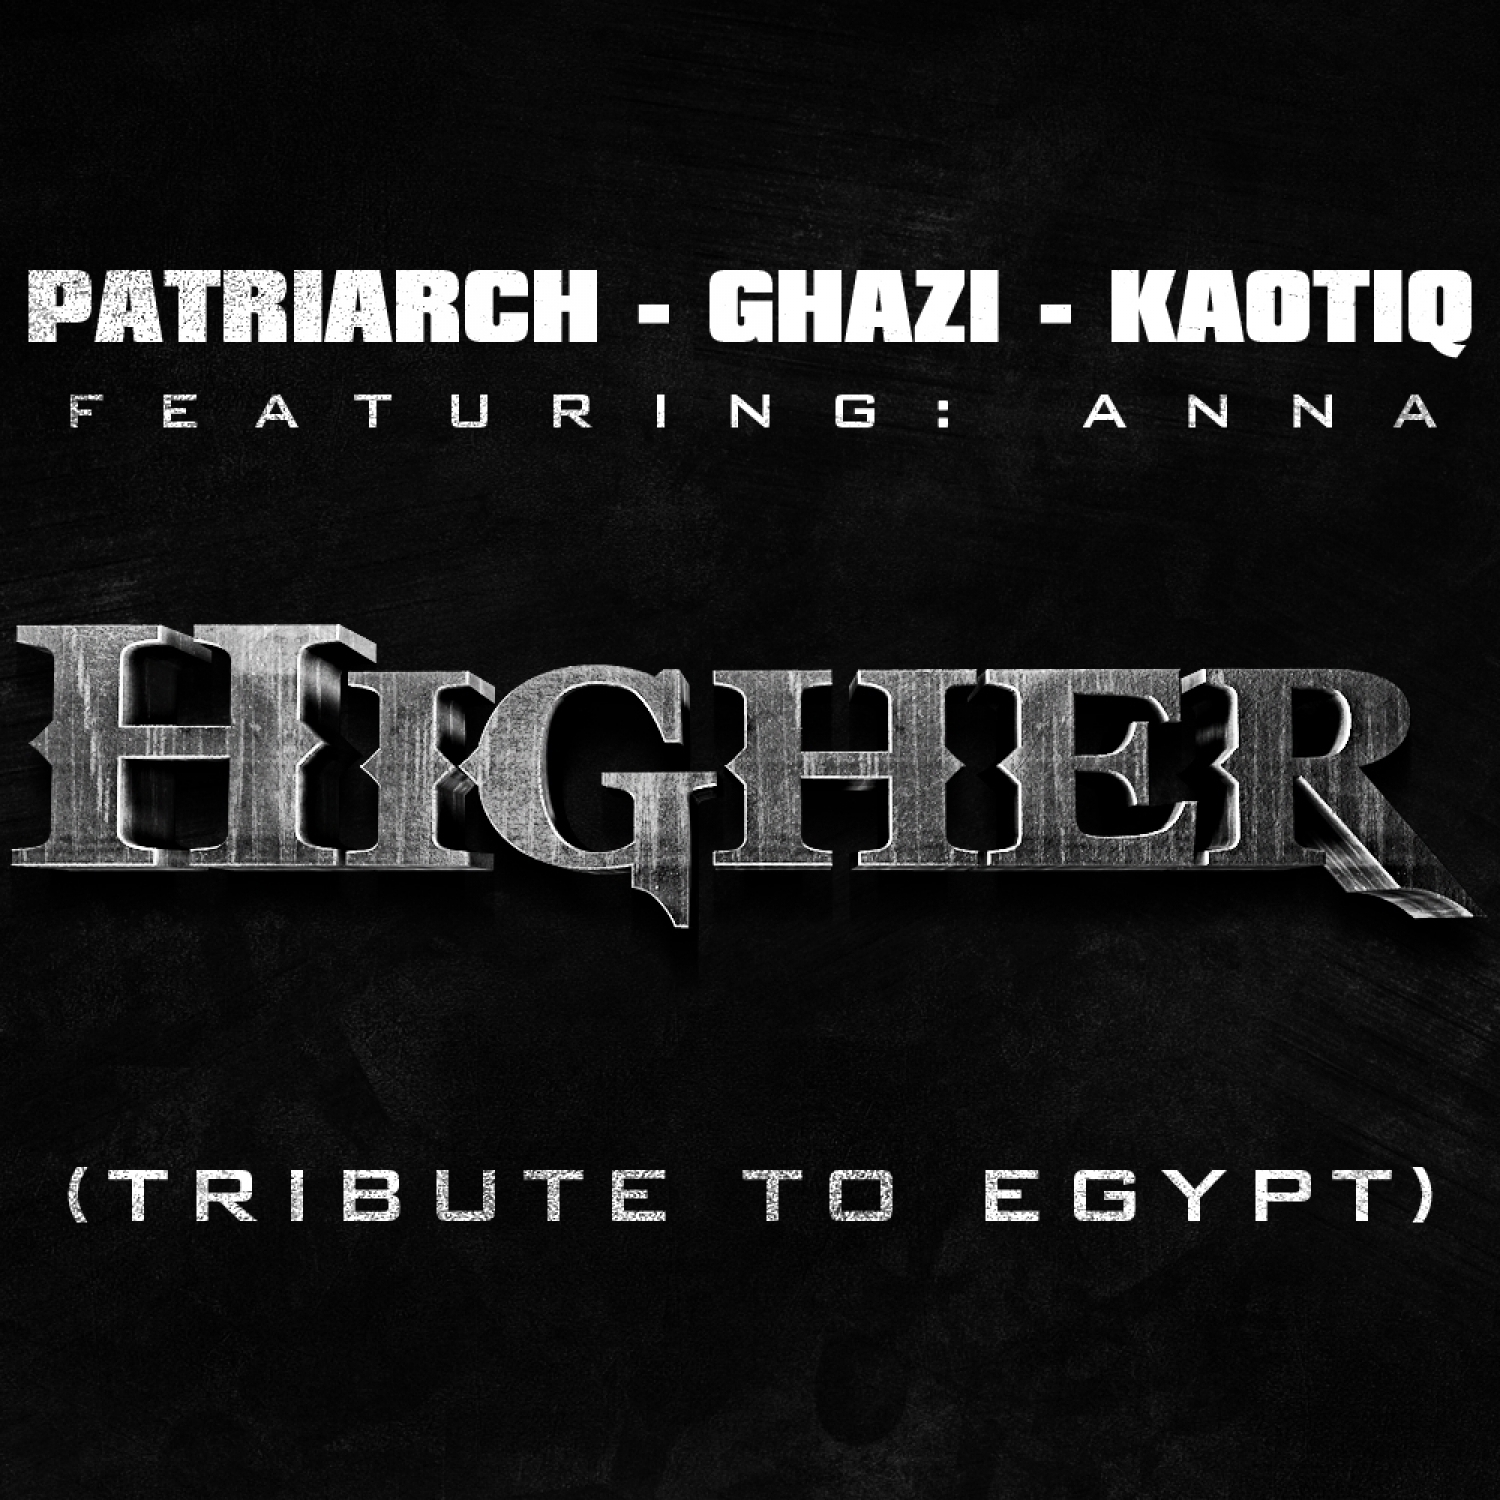 Higher - A Tribute To Egypt